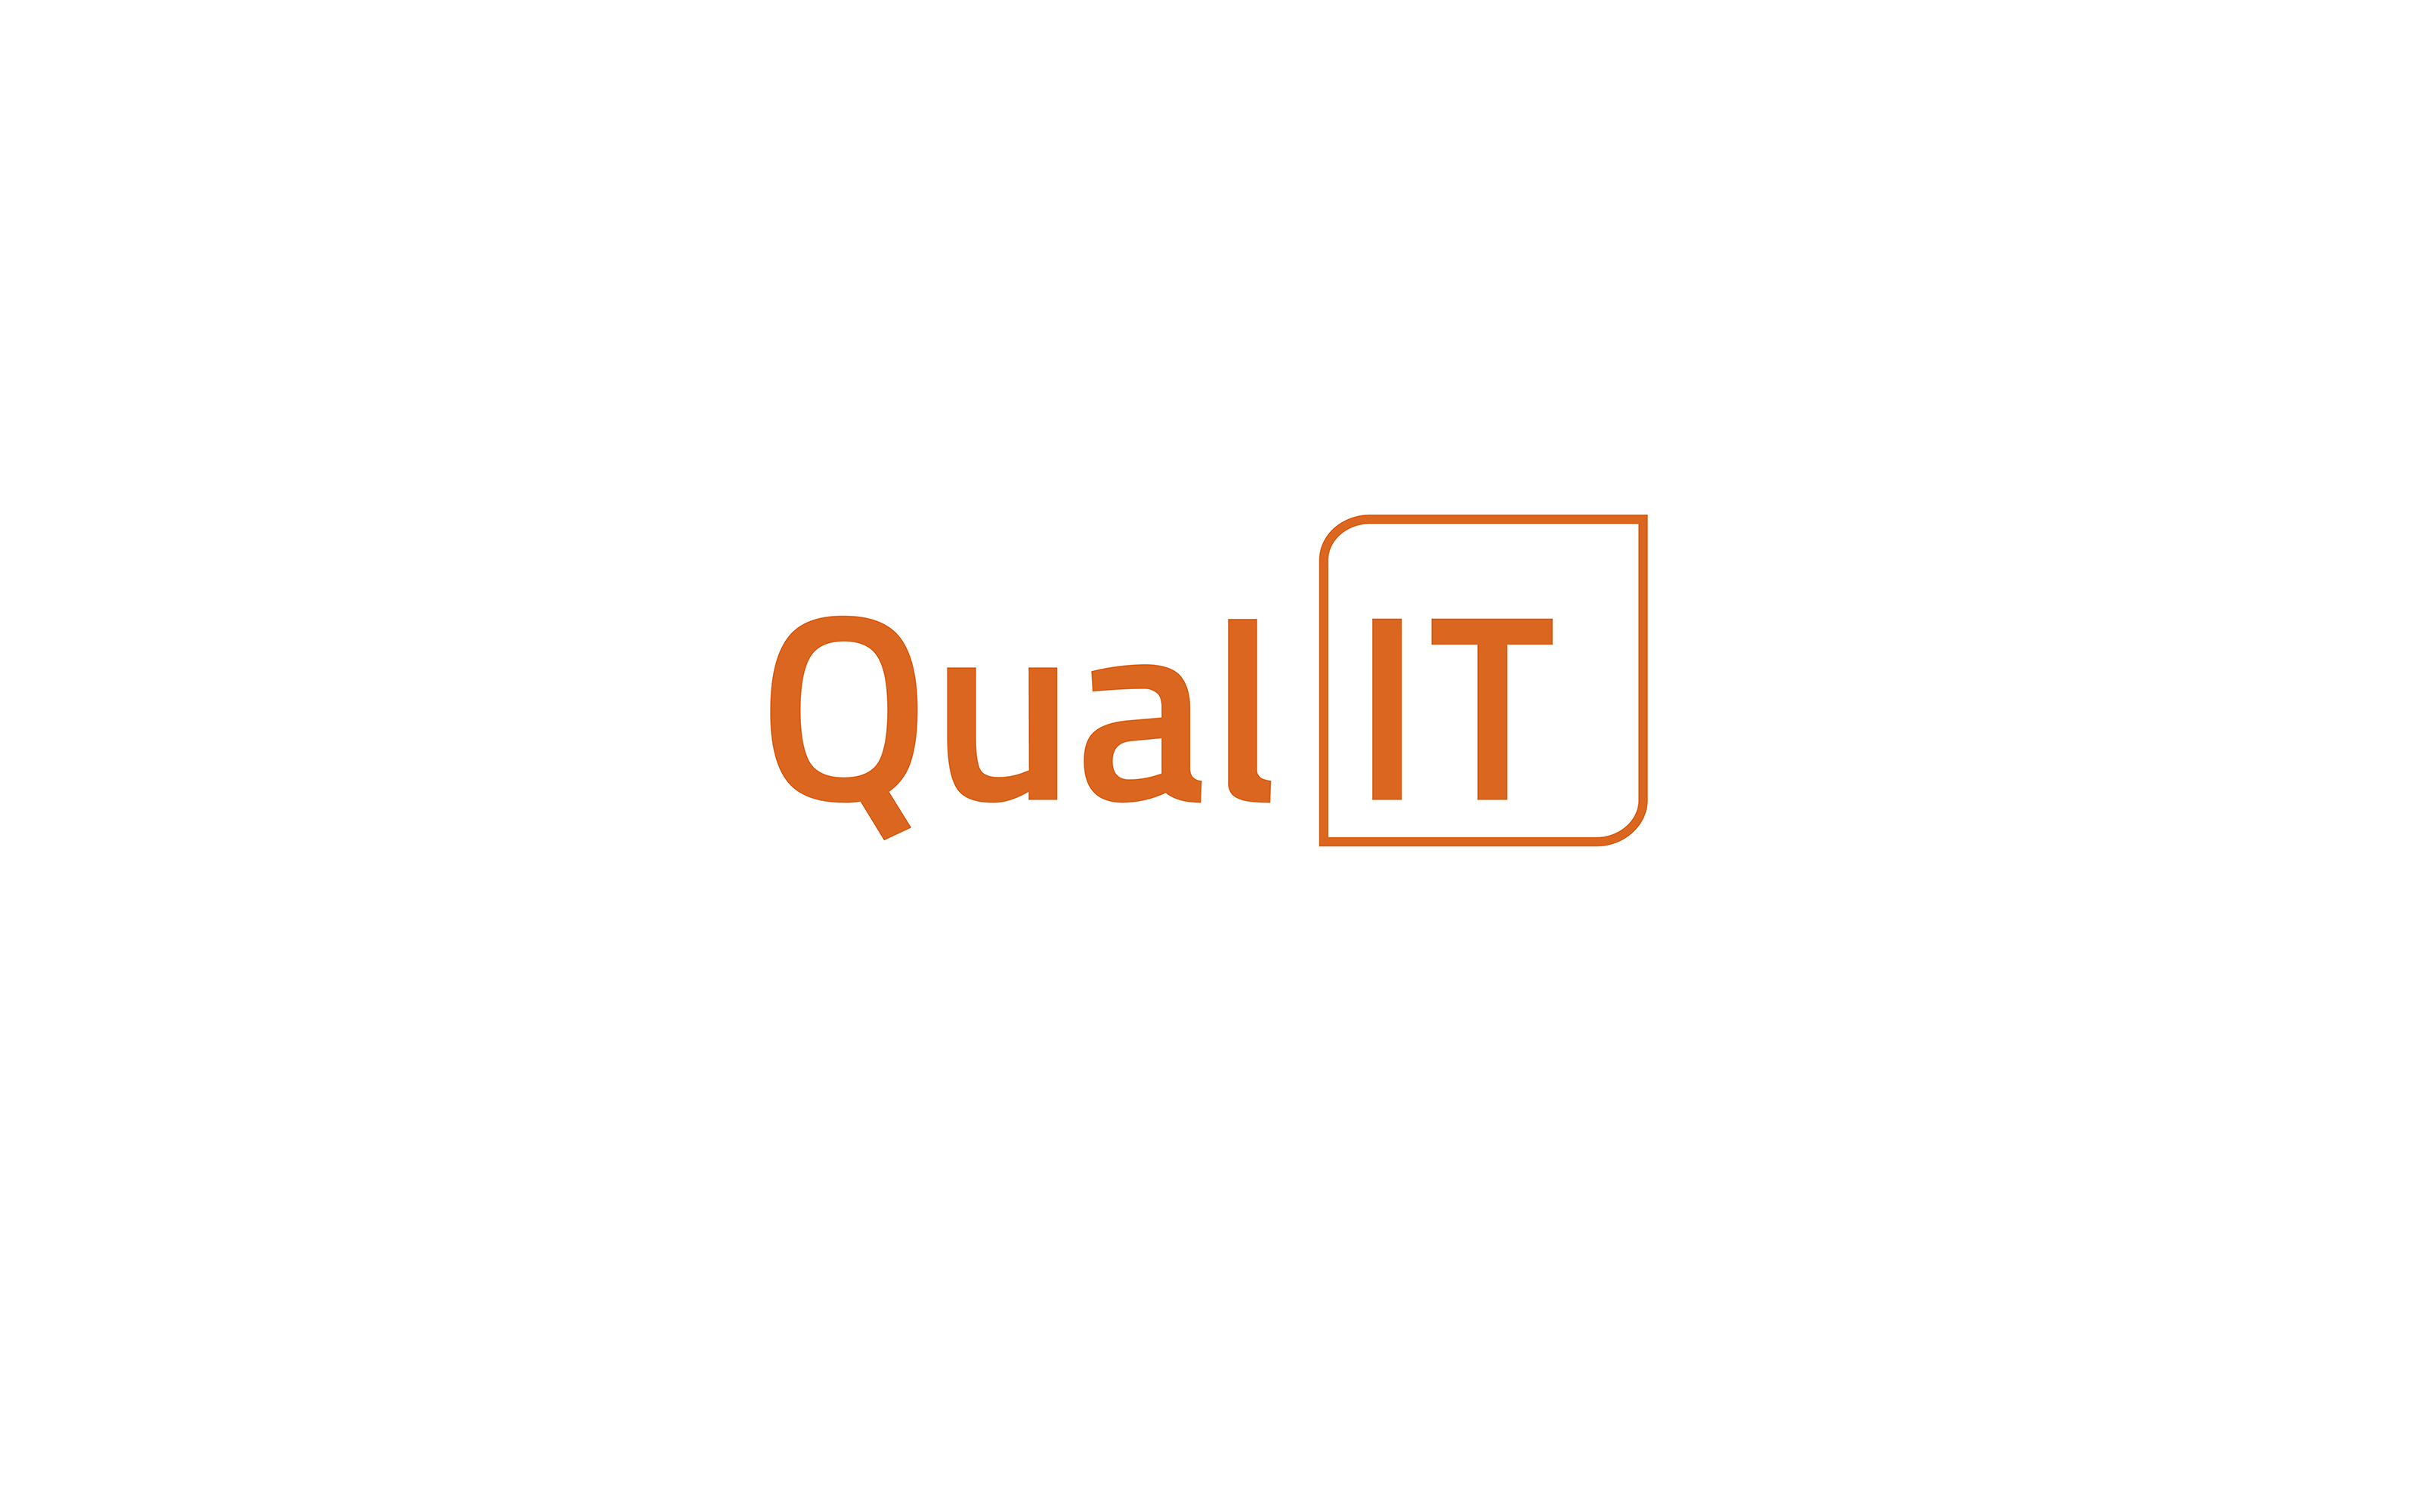 Qual IT logo designed by re:brand